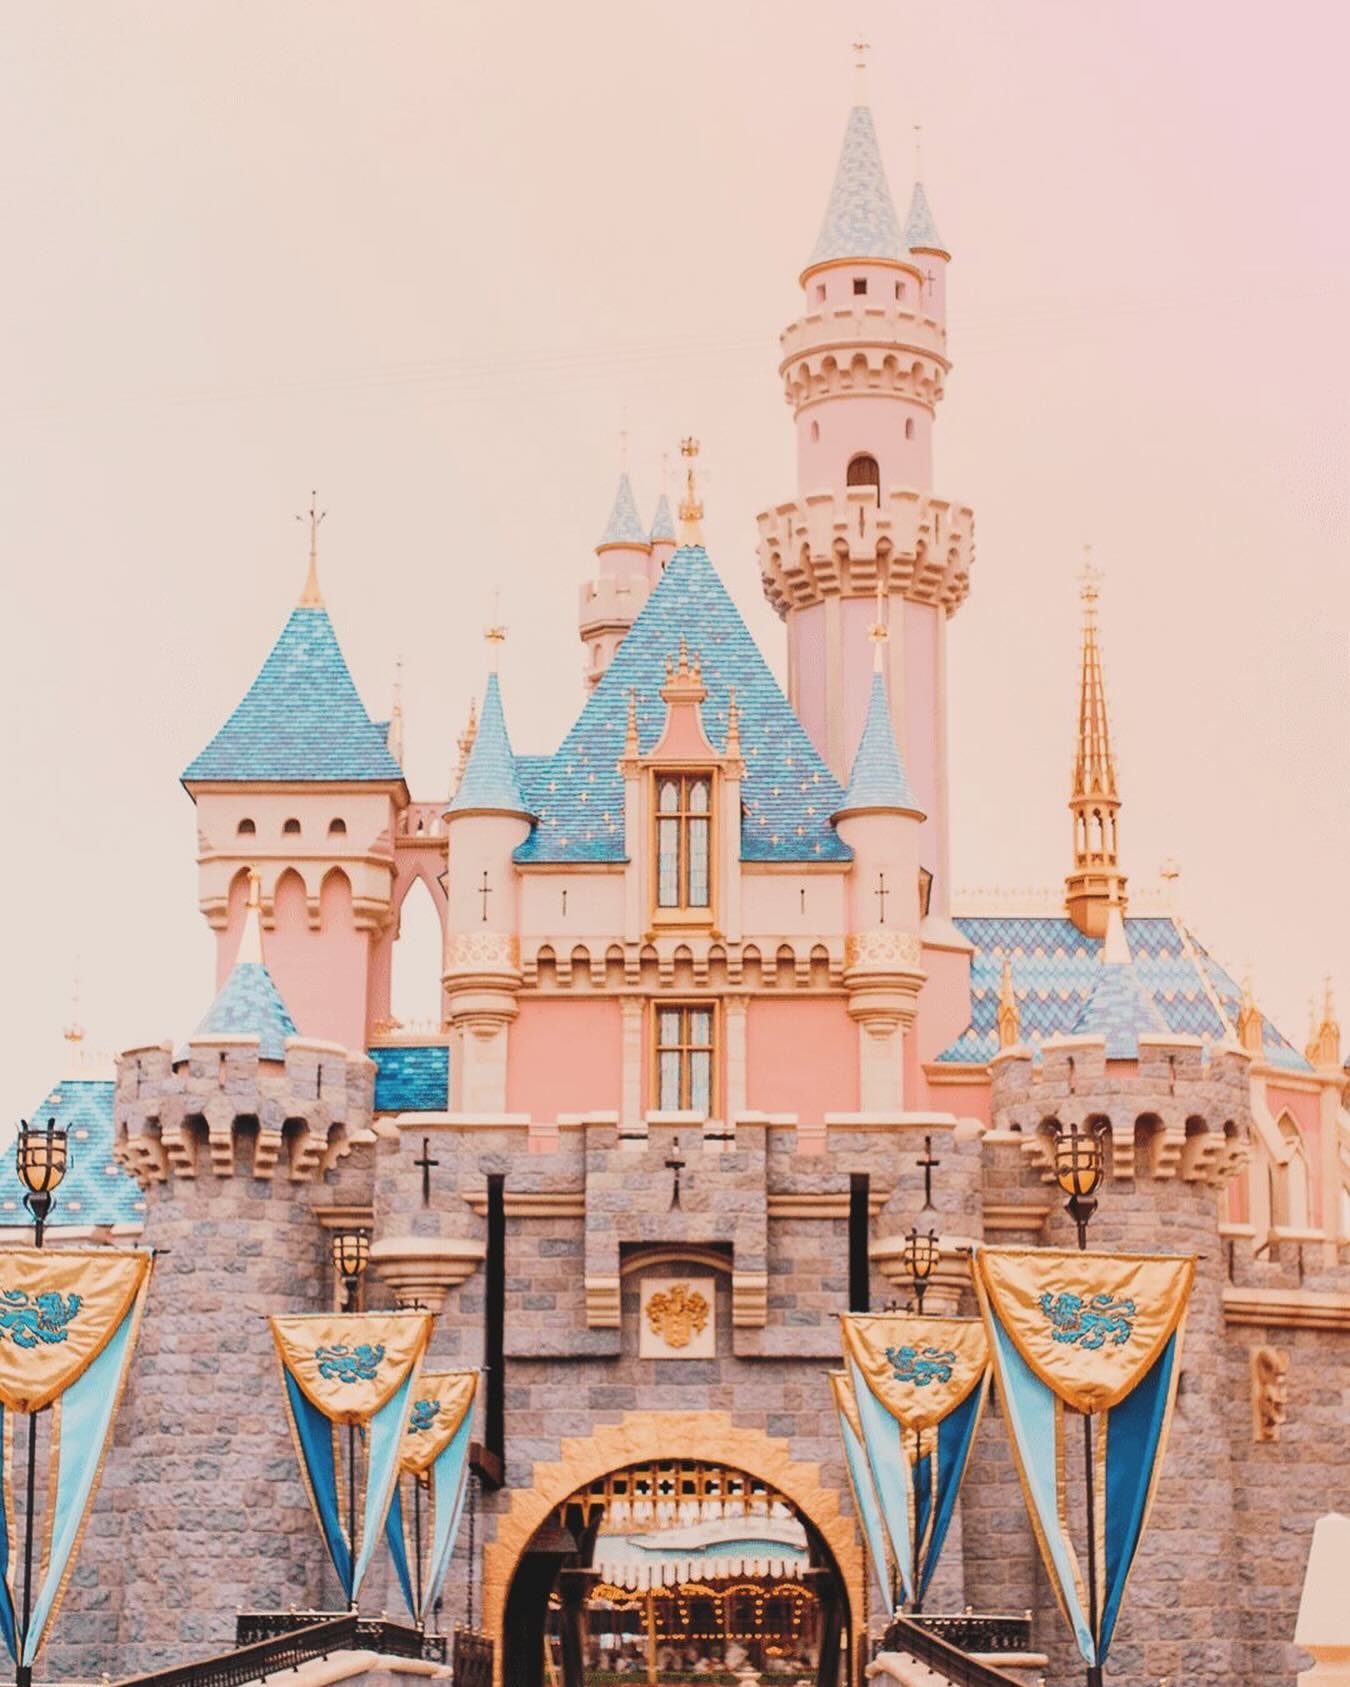 See you tomorrow Disneyland 👀🐭🩷 &bull;
Guess below at new ears and new products coming! &bull;
&bull;
&bull;
#factory55 #factoryfiftyfive #disneyland #disneylandpark #disneyparks #sleepingbeautycastle #disneyphoto #disneytravel